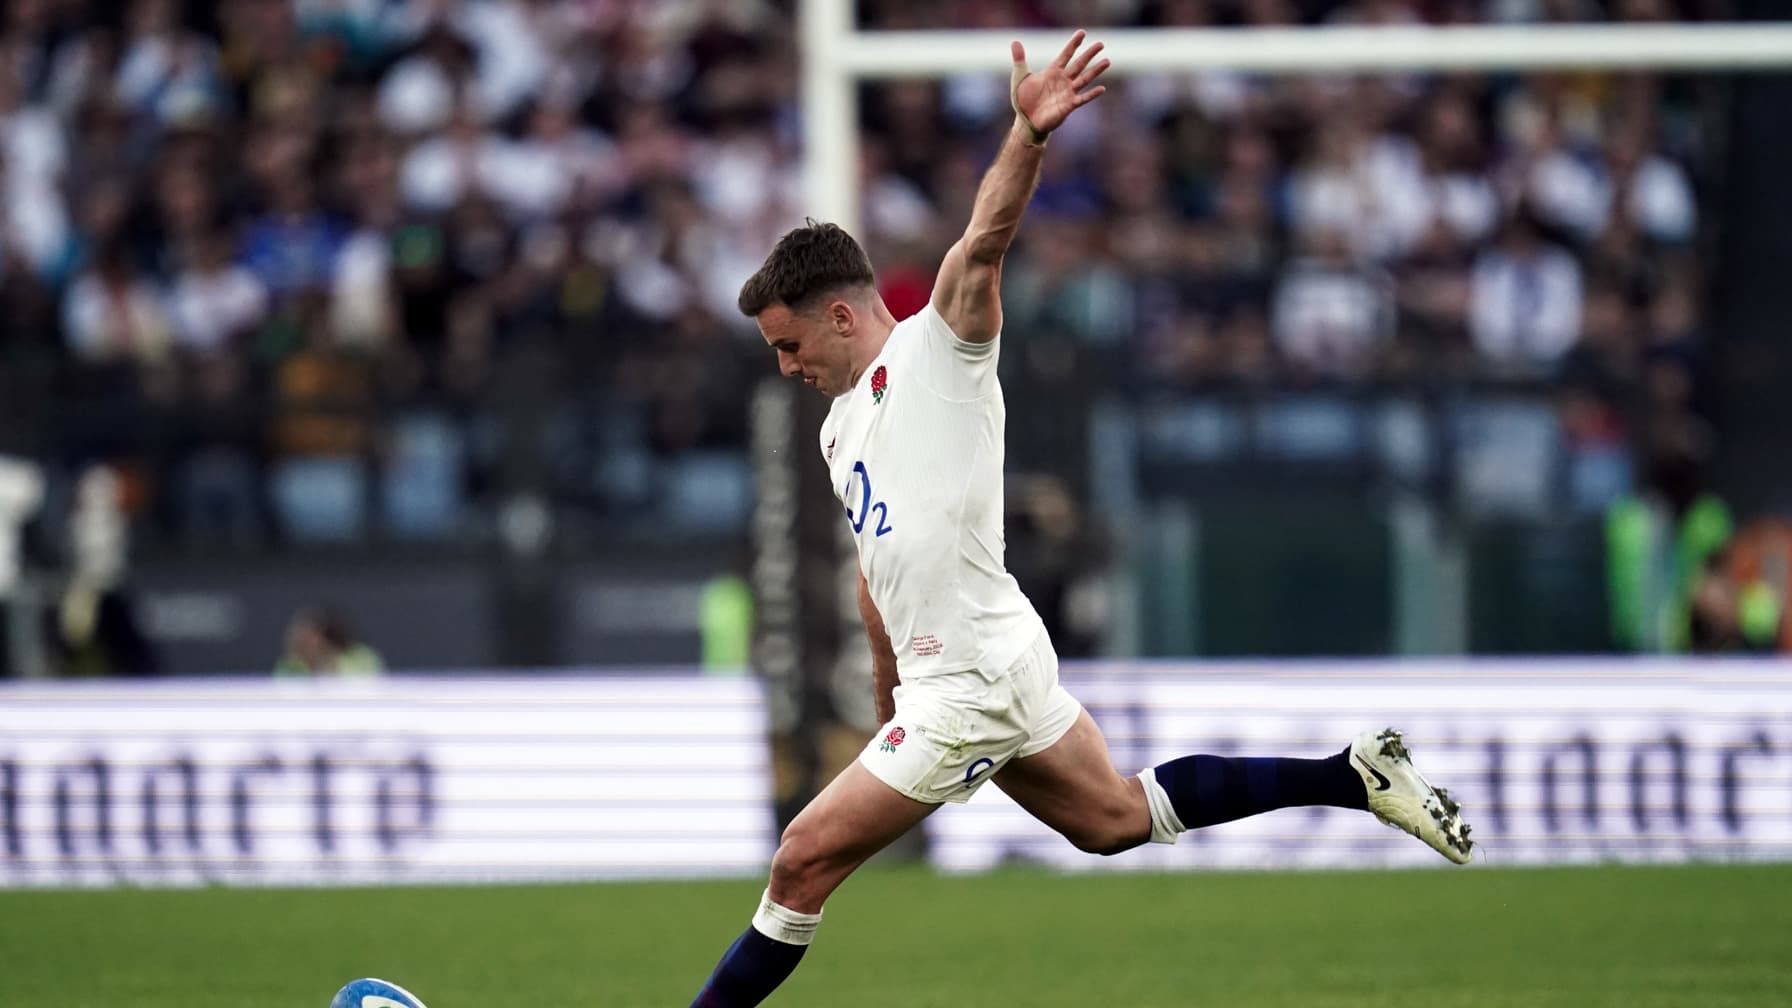 Like Ramos facing Colbay, Englishman George Ford was tricked into his conversion by the wily Welshmen.